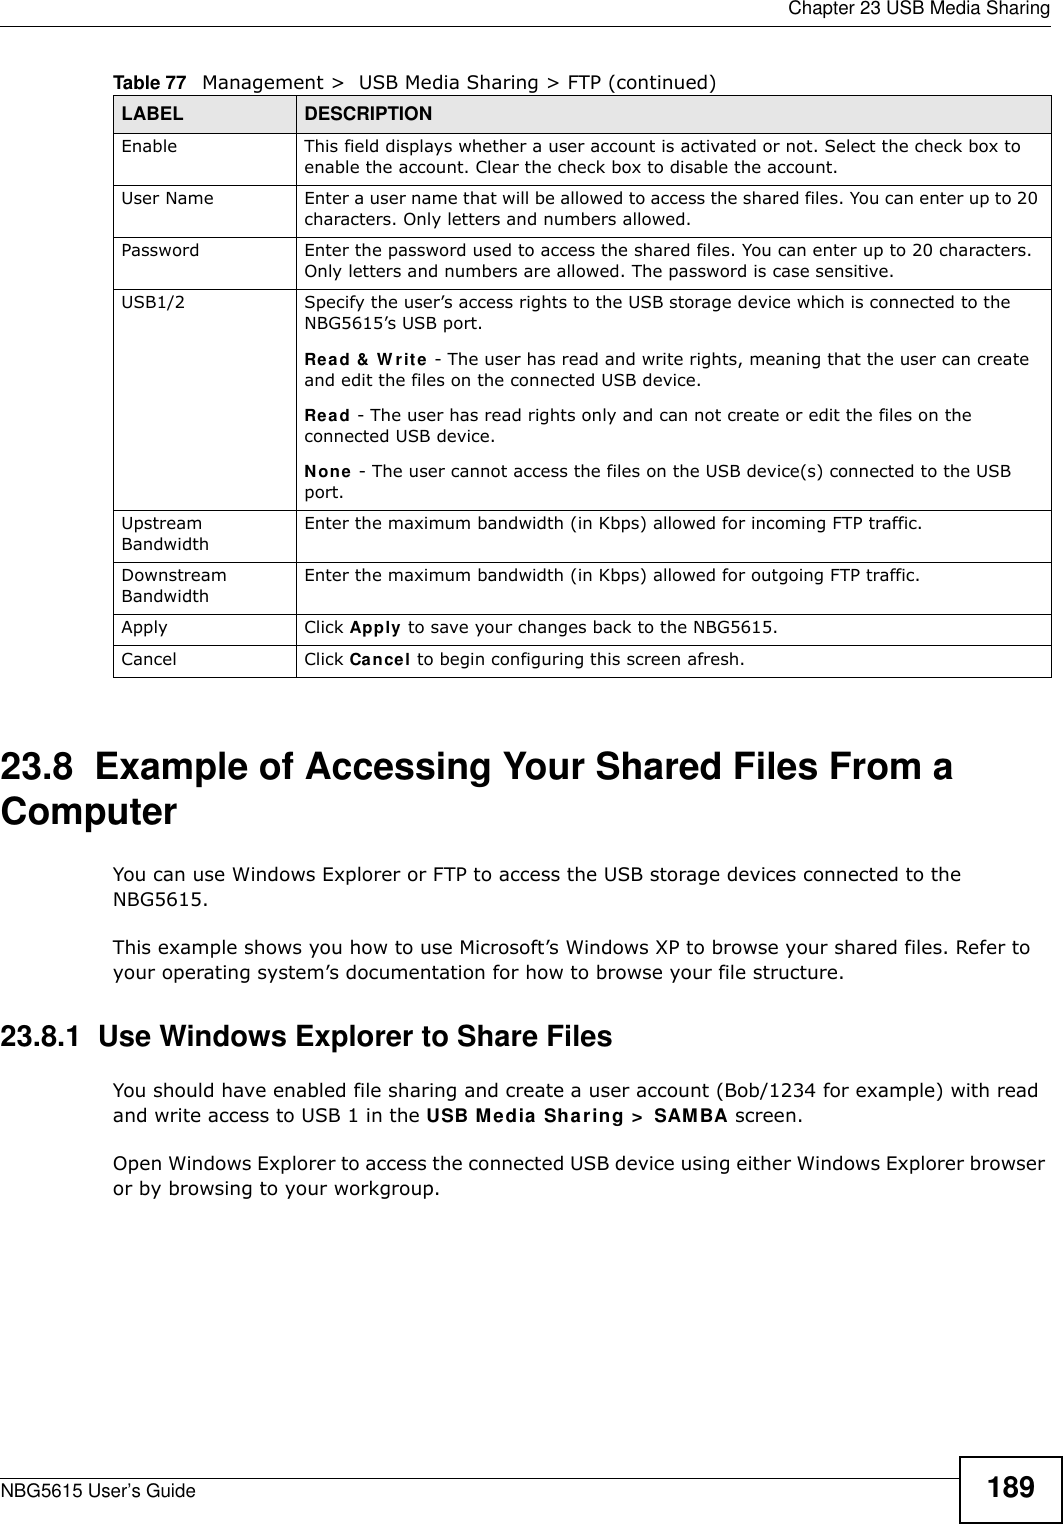  Chapter 23 USB Media SharingNBG5615 User’s Guide 18923.8  Example of Accessing Your Shared Files From a Computer You can use Windows Explorer or FTP to access the USB storage devices connected to the NBG5615.This example shows you how to use Microsoft’s Windows XP to browse your shared files. Refer to your operating system’s documentation for how to browse your file structure. 23.8.1  Use Windows Explorer to Share Files You should have enabled file sharing and create a user account (Bob/1234 for example) with read and write access to USB 1 in the USB Media Sharing &gt;  SAMBA screen.Open Windows Explorer to access the connected USB device using either Windows Explorer browser or by browsing to your workgroup.Enable This field displays whether a user account is activated or not. Select the check box to enable the account. Clear the check box to disable the account.User Name Enter a user name that will be allowed to access the shared files. You can enter up to 20 characters. Only letters and numbers allowed.Password Enter the password used to access the shared files. You can enter up to 20 characters. Only letters and numbers are allowed. The password is case sensitive.USB1/2 Specify the user’s access rights to the USB storage device which is connected to the NBG5615’s USB port.Read &amp; W rite - The user has read and write rights, meaning that the user can create and edit the files on the connected USB device.Read - The user has read rights only and can not create or edit the files on the connected USB device.None - The user cannot access the files on the USB device(s) connected to the USB port.Upstream BandwidthEnter the maximum bandwidth (in Kbps) allowed for incoming FTP traffic.Downstream BandwidthEnter the maximum bandwidth (in Kbps) allowed for outgoing FTP traffic.Apply Click Apply to save your changes back to the NBG5615.Cancel Click Cancel to begin configuring this screen afresh.Table 77   Management &gt;  USB Media Sharing &gt; FTP (continued)LABEL DESCRIPTION